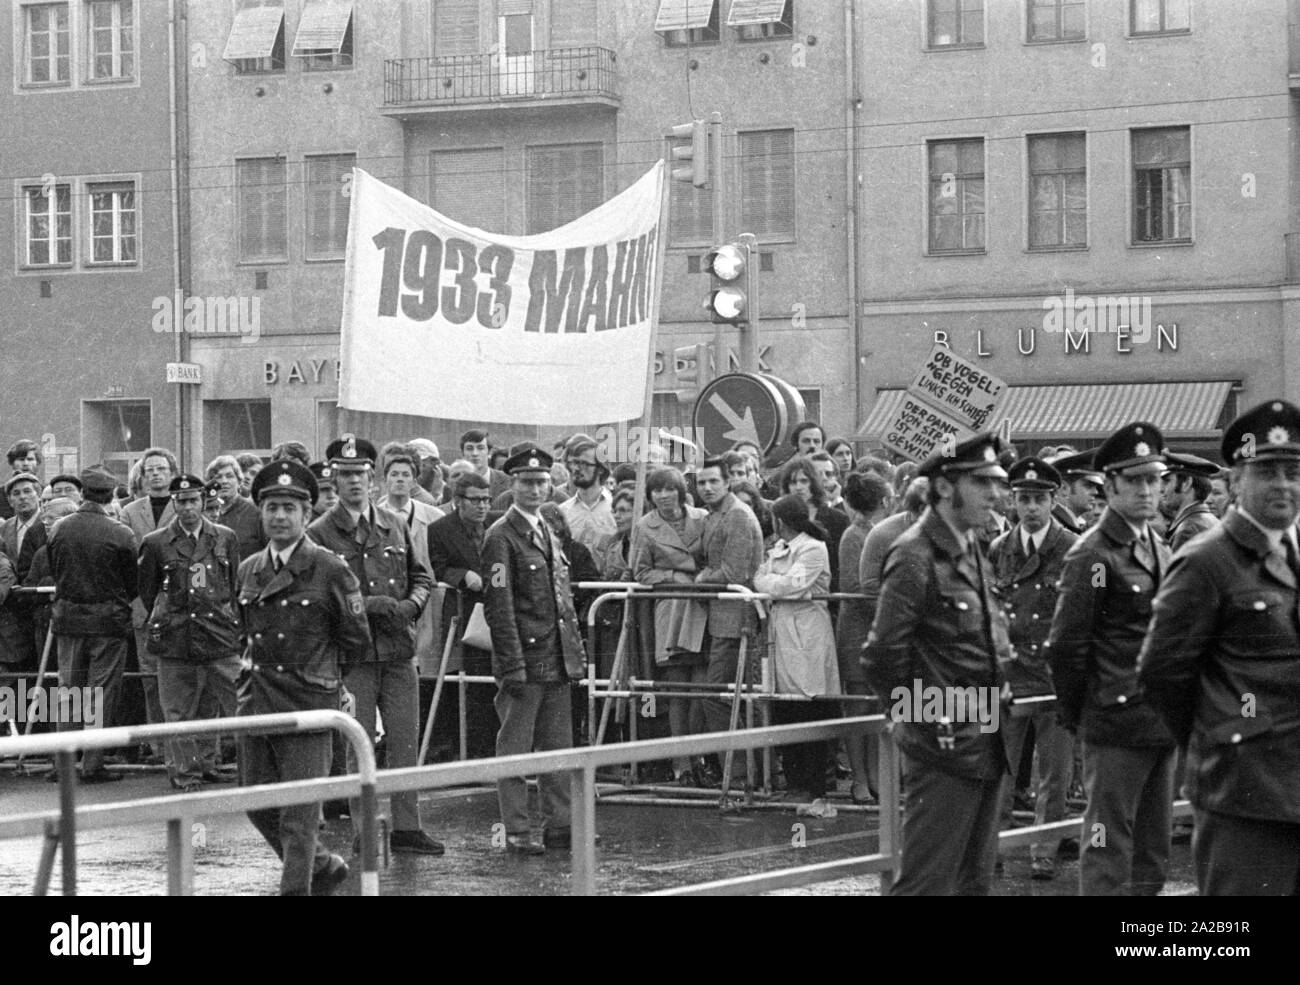 On 03.04.1971 the neo-Nazi party 'German People's Union' (today NPD) organized its first mass rally in Schwabinger Braeu in Munich, under the direction of the publisher Gerhard Frey.  There was a protest rally with leading politicians, a counter-demonstration and blockade of the building. Pictured: Protesters with the sign '1933 Remind' and 'Mayor Vogel: Left I'm shooting'. Stock Photo